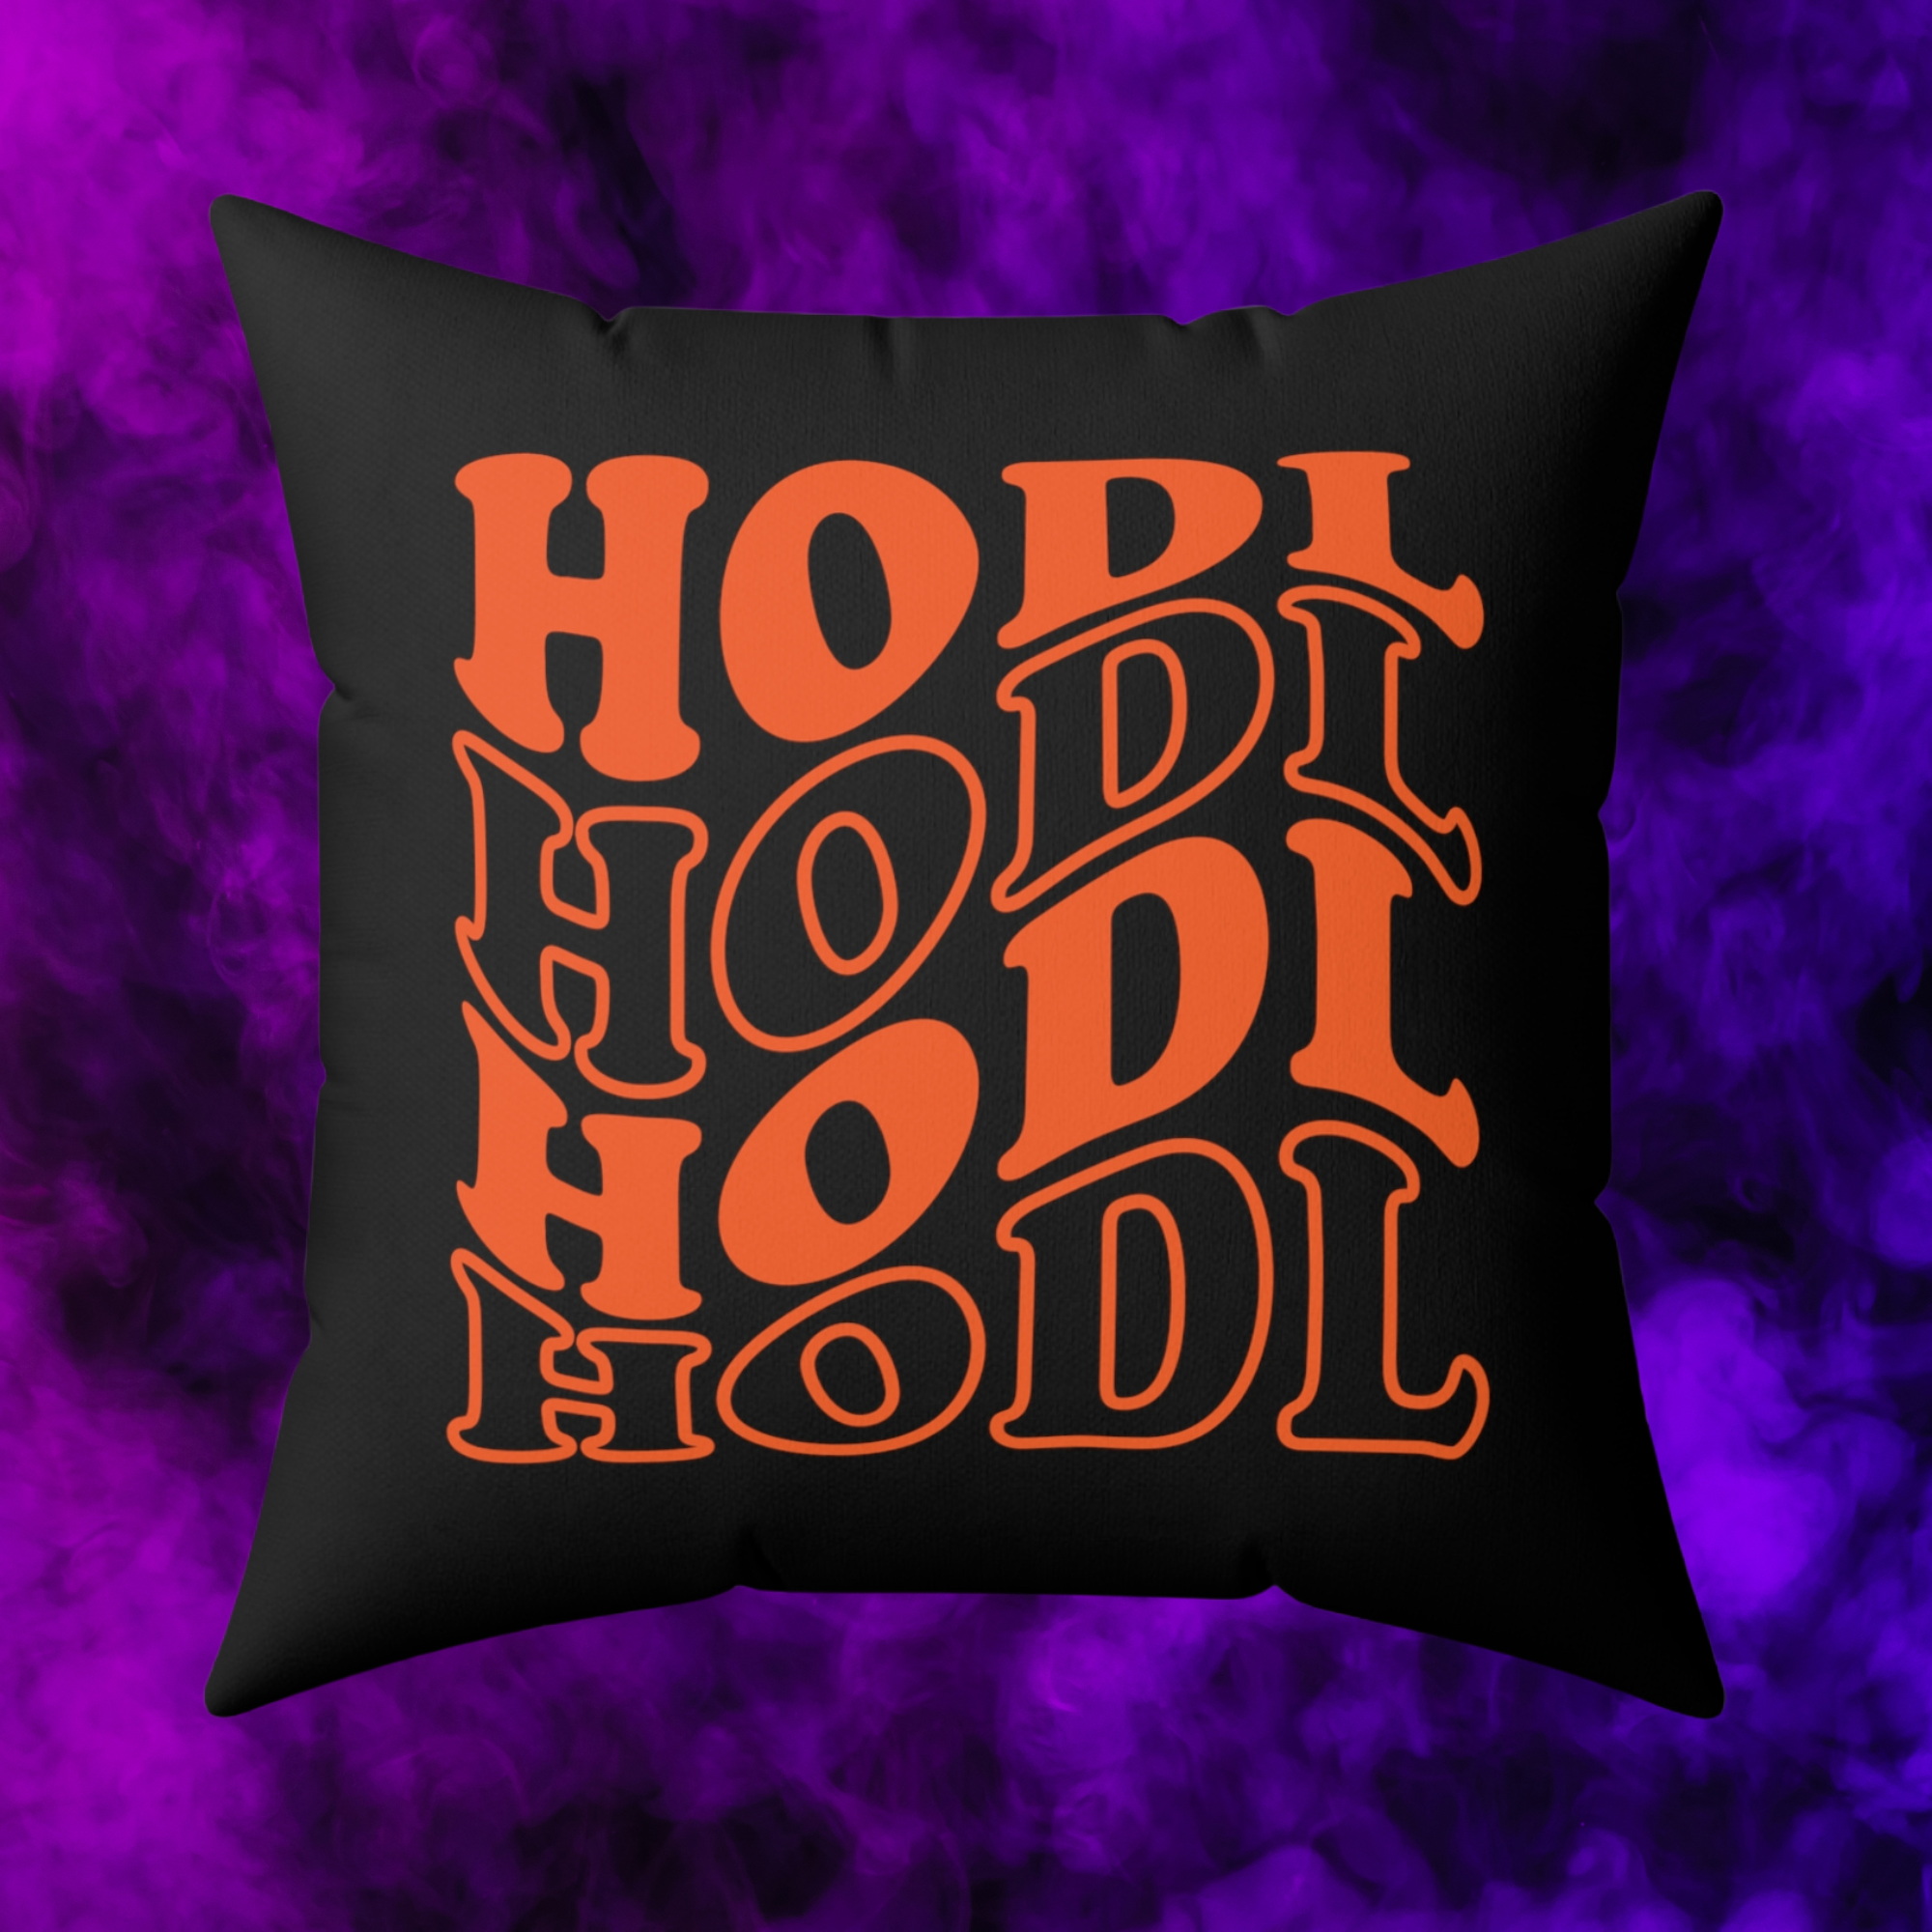 Crypto Home Decor - HODL Pillow available from NEONCRYPTO STORE.